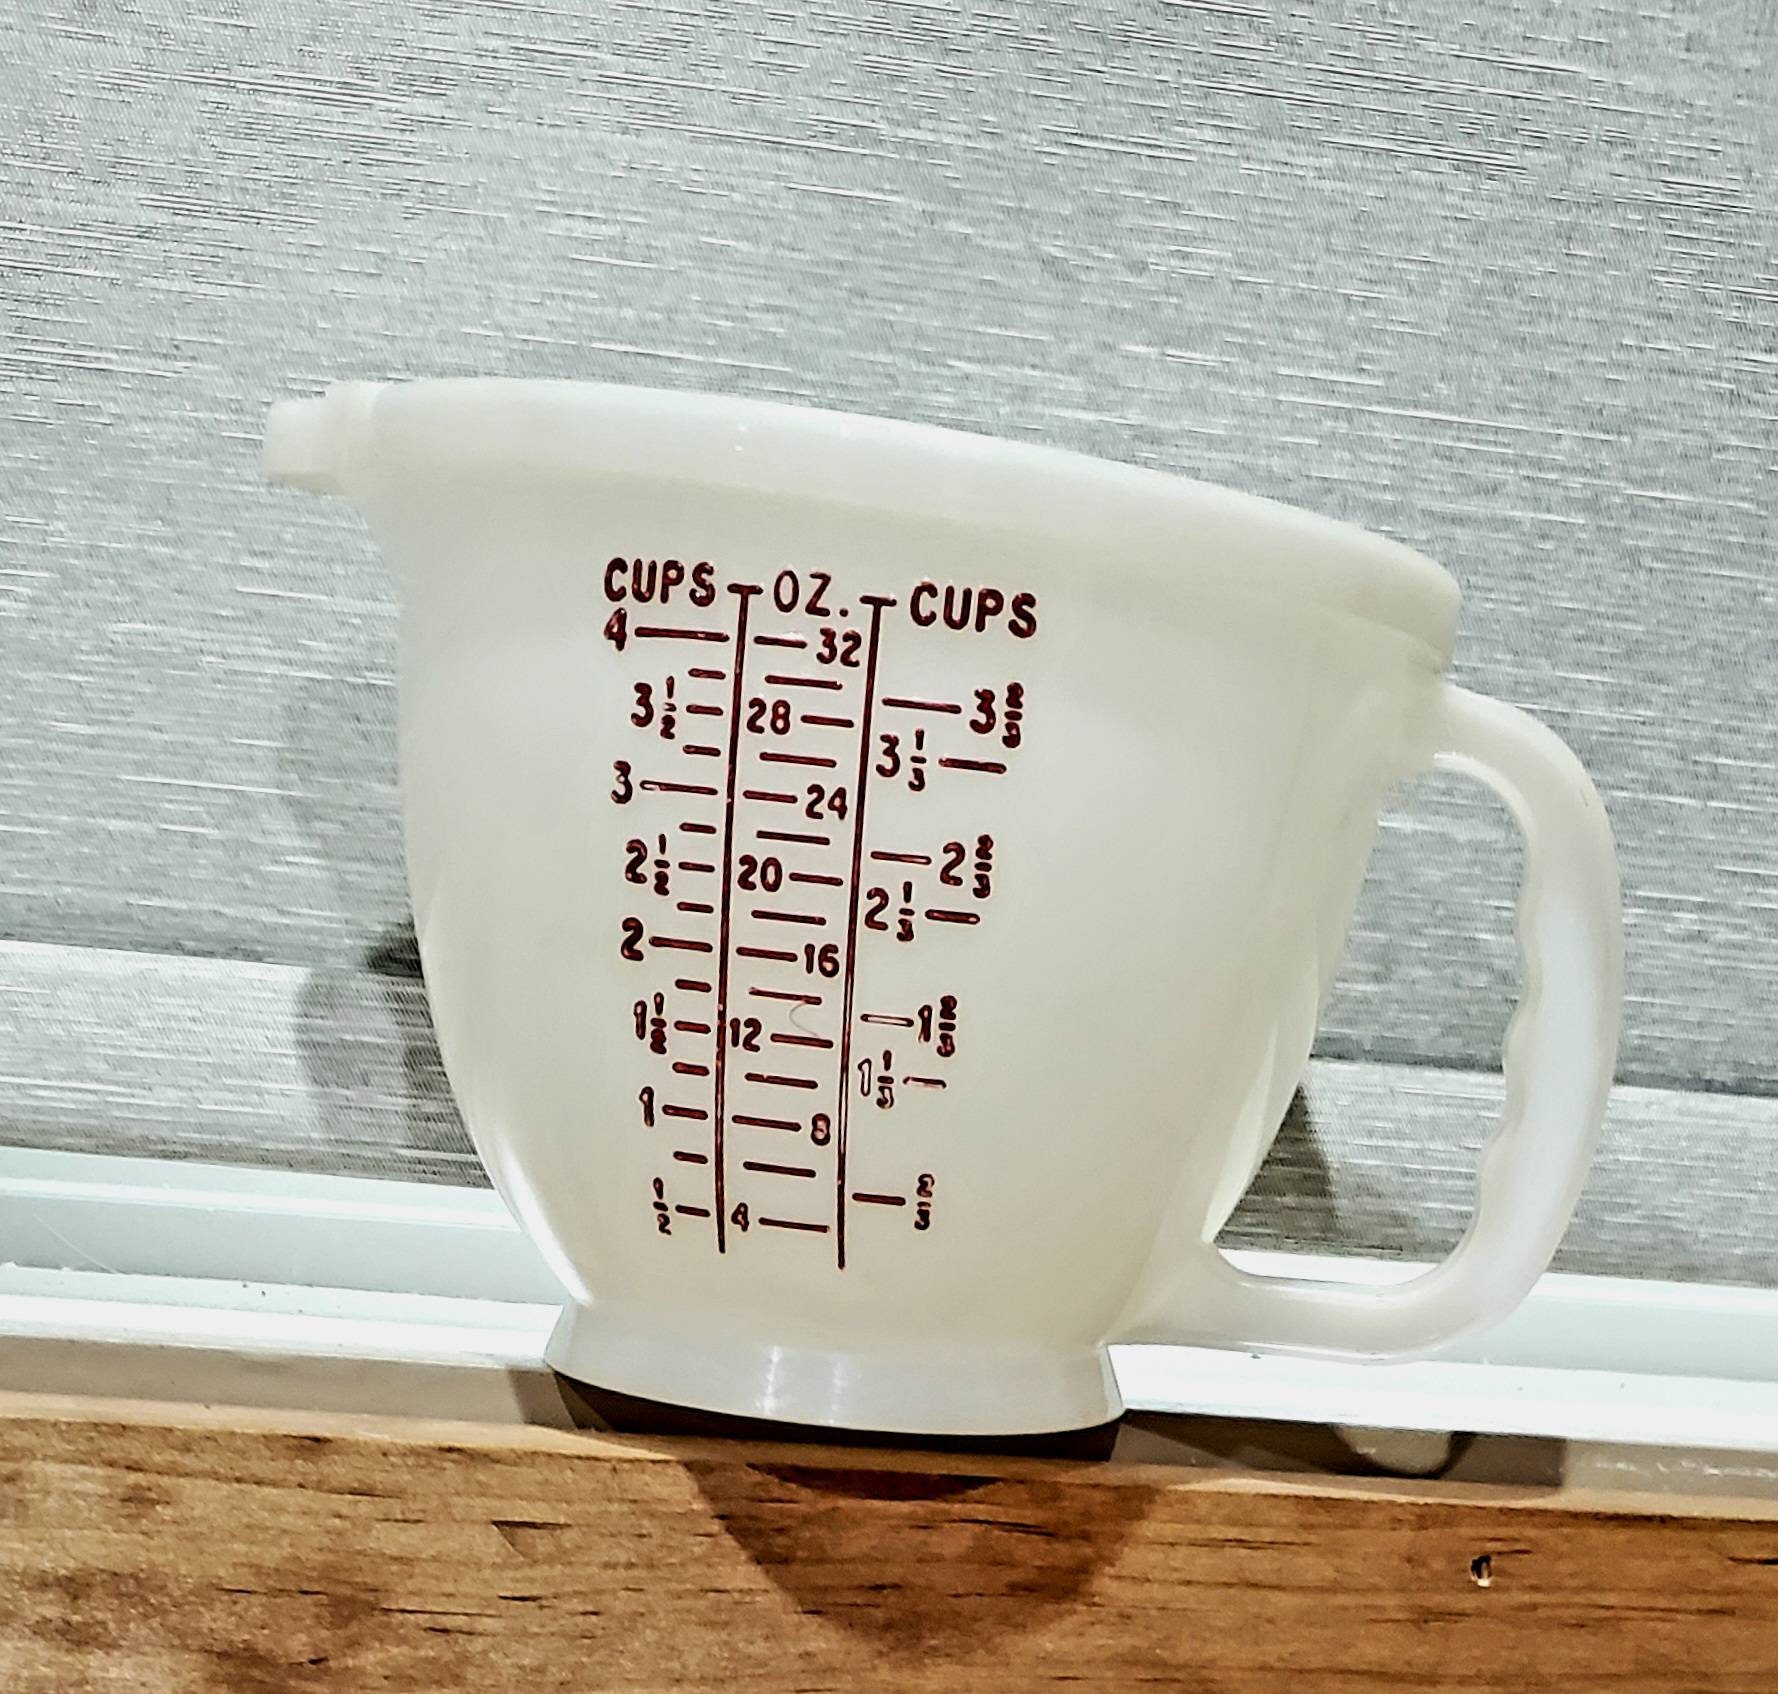 Vintage Tupperware Measuring Cup Set of 6 Cups Classic Sheer White